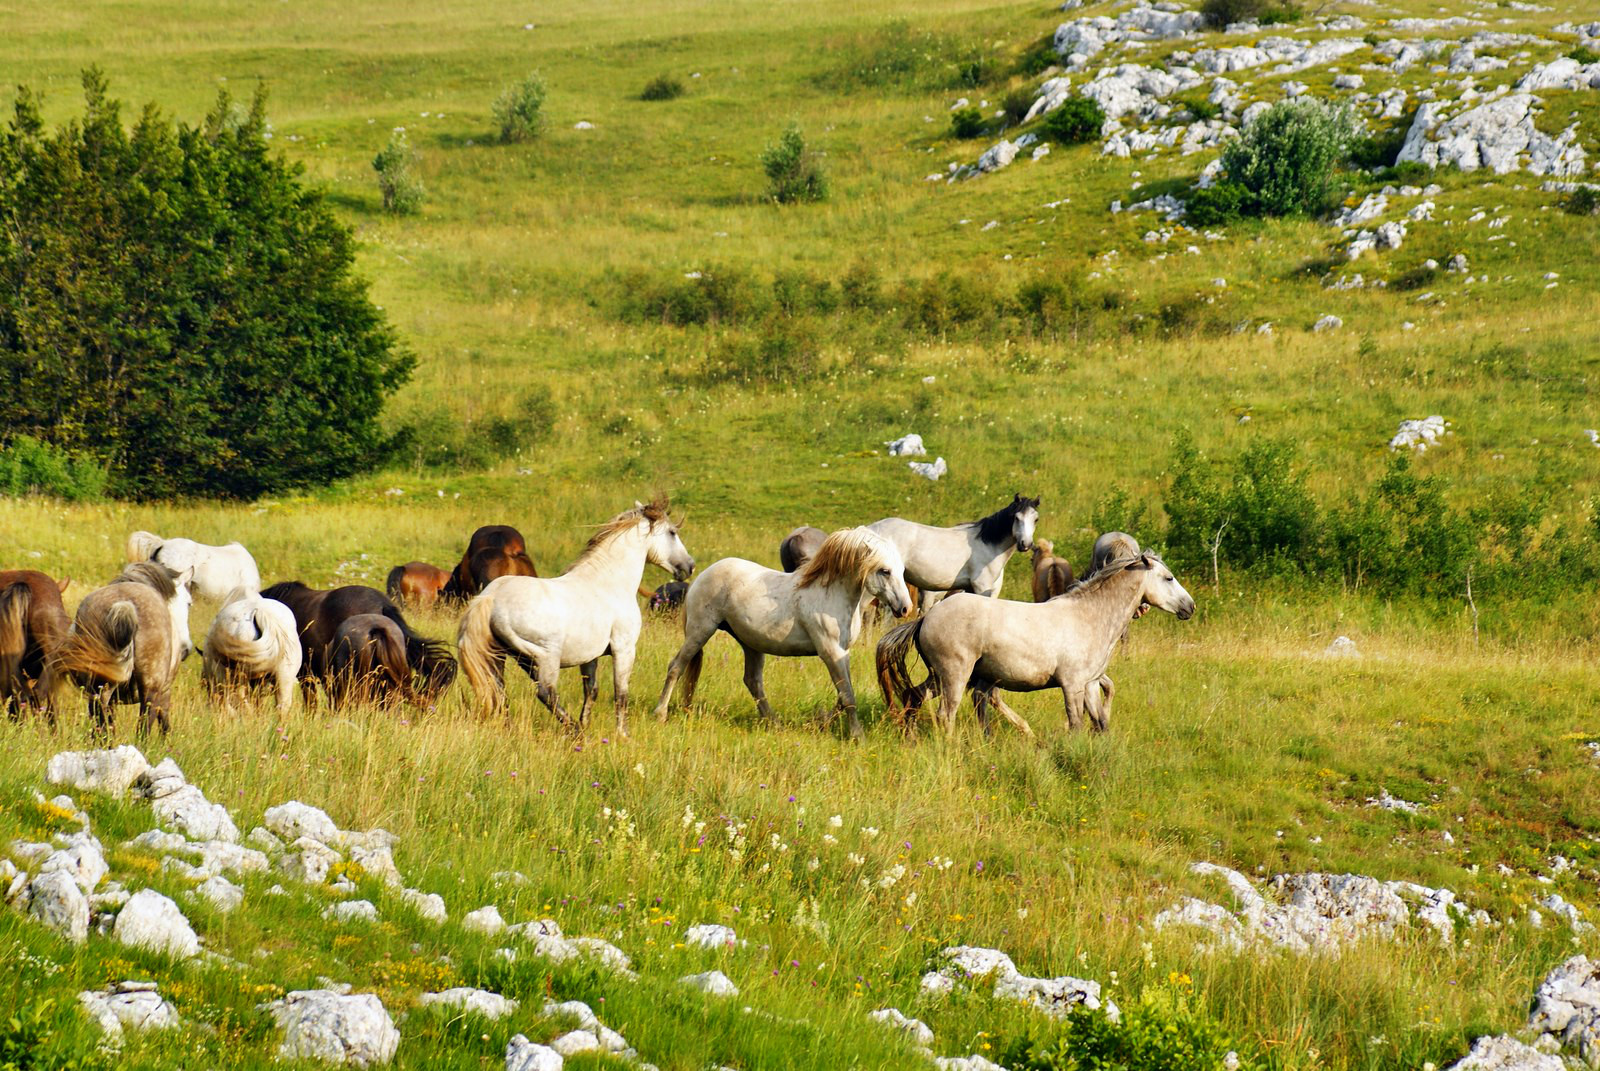 a group of horses grazing on grass in the middle of a field